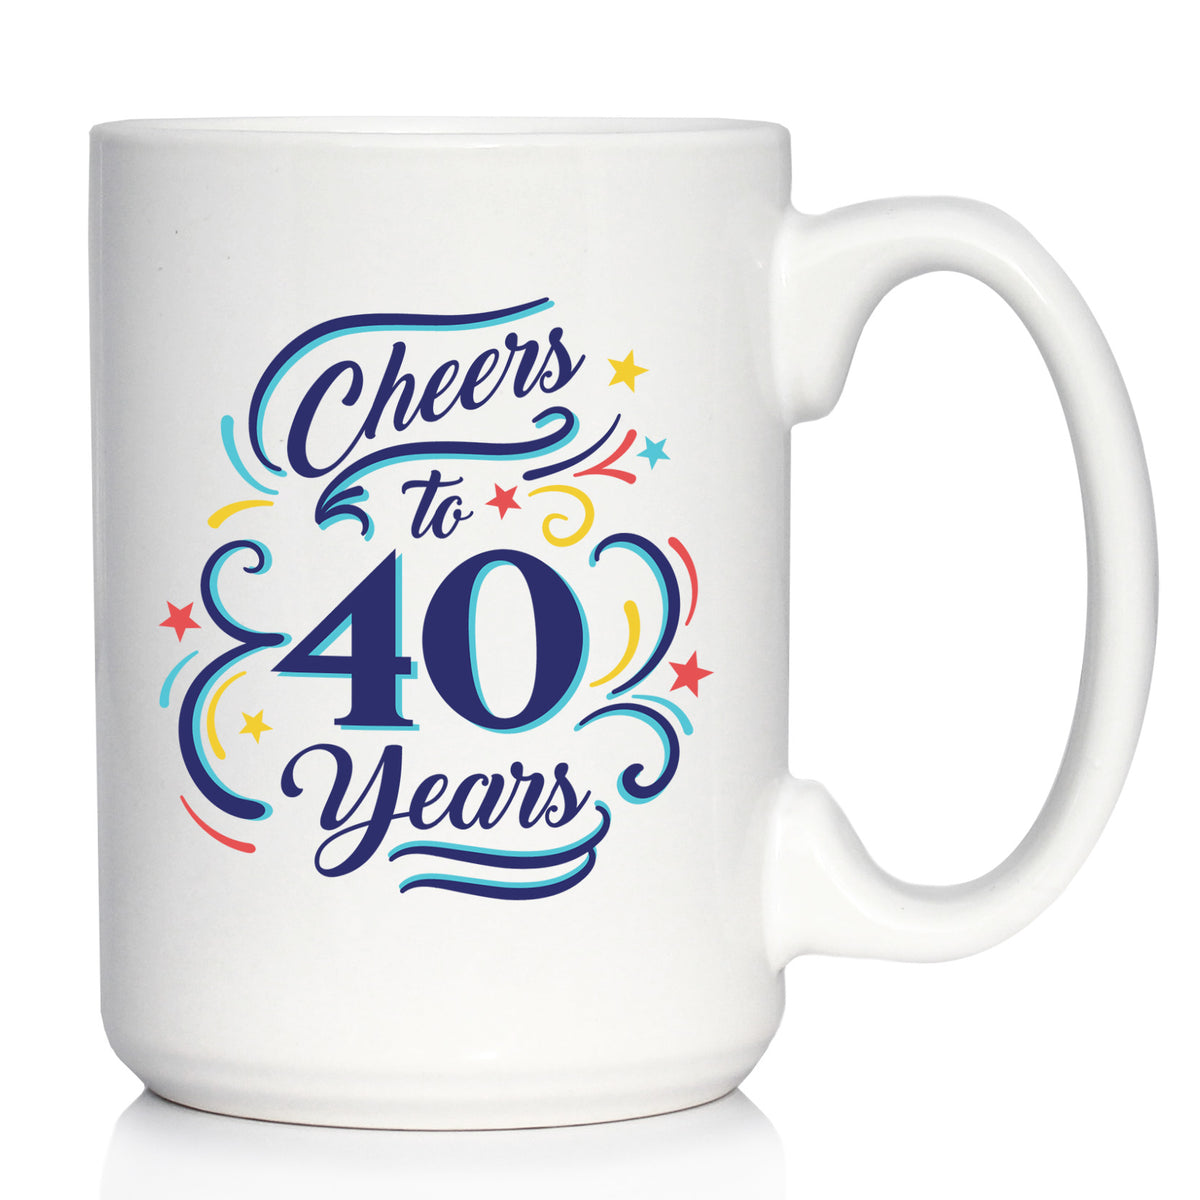 Cheers to 40 Years - Coffee Mug Gifts for Women &amp; Men - 40th Anniversary Party Decor